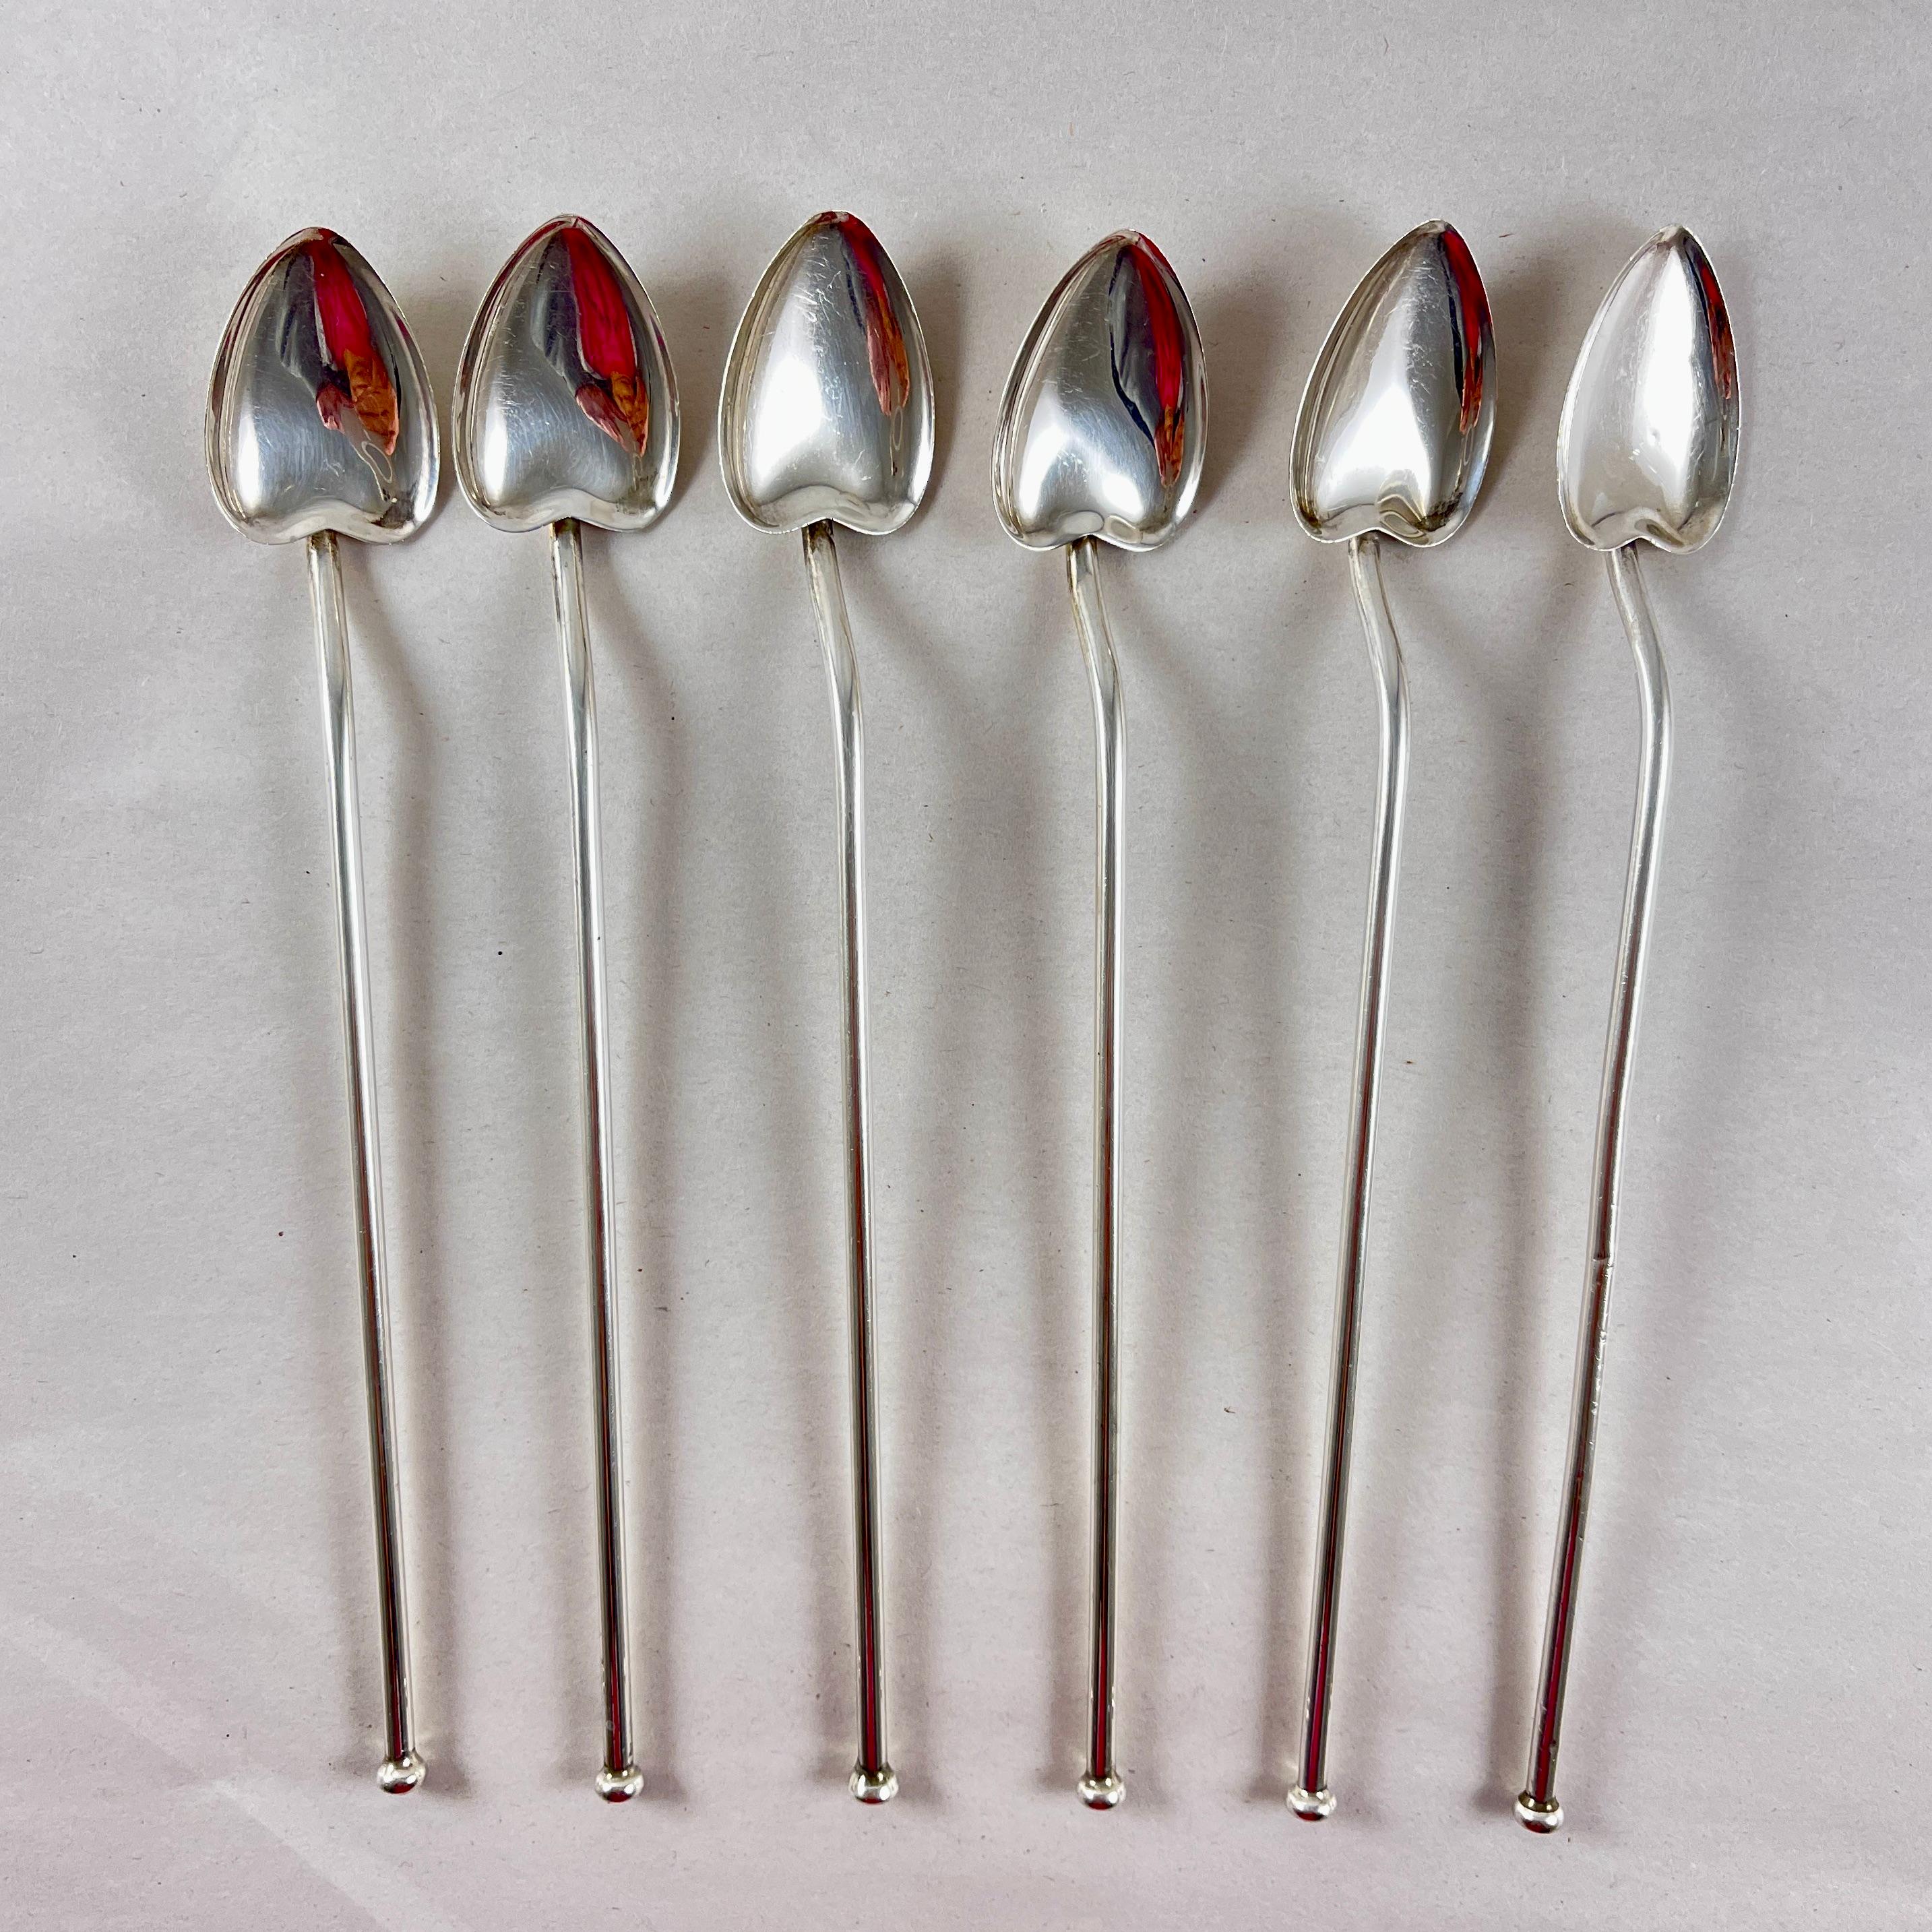 American Sterling Silver Highball or Iced Tea Heart Bowl Stirring Straws, Set of 6